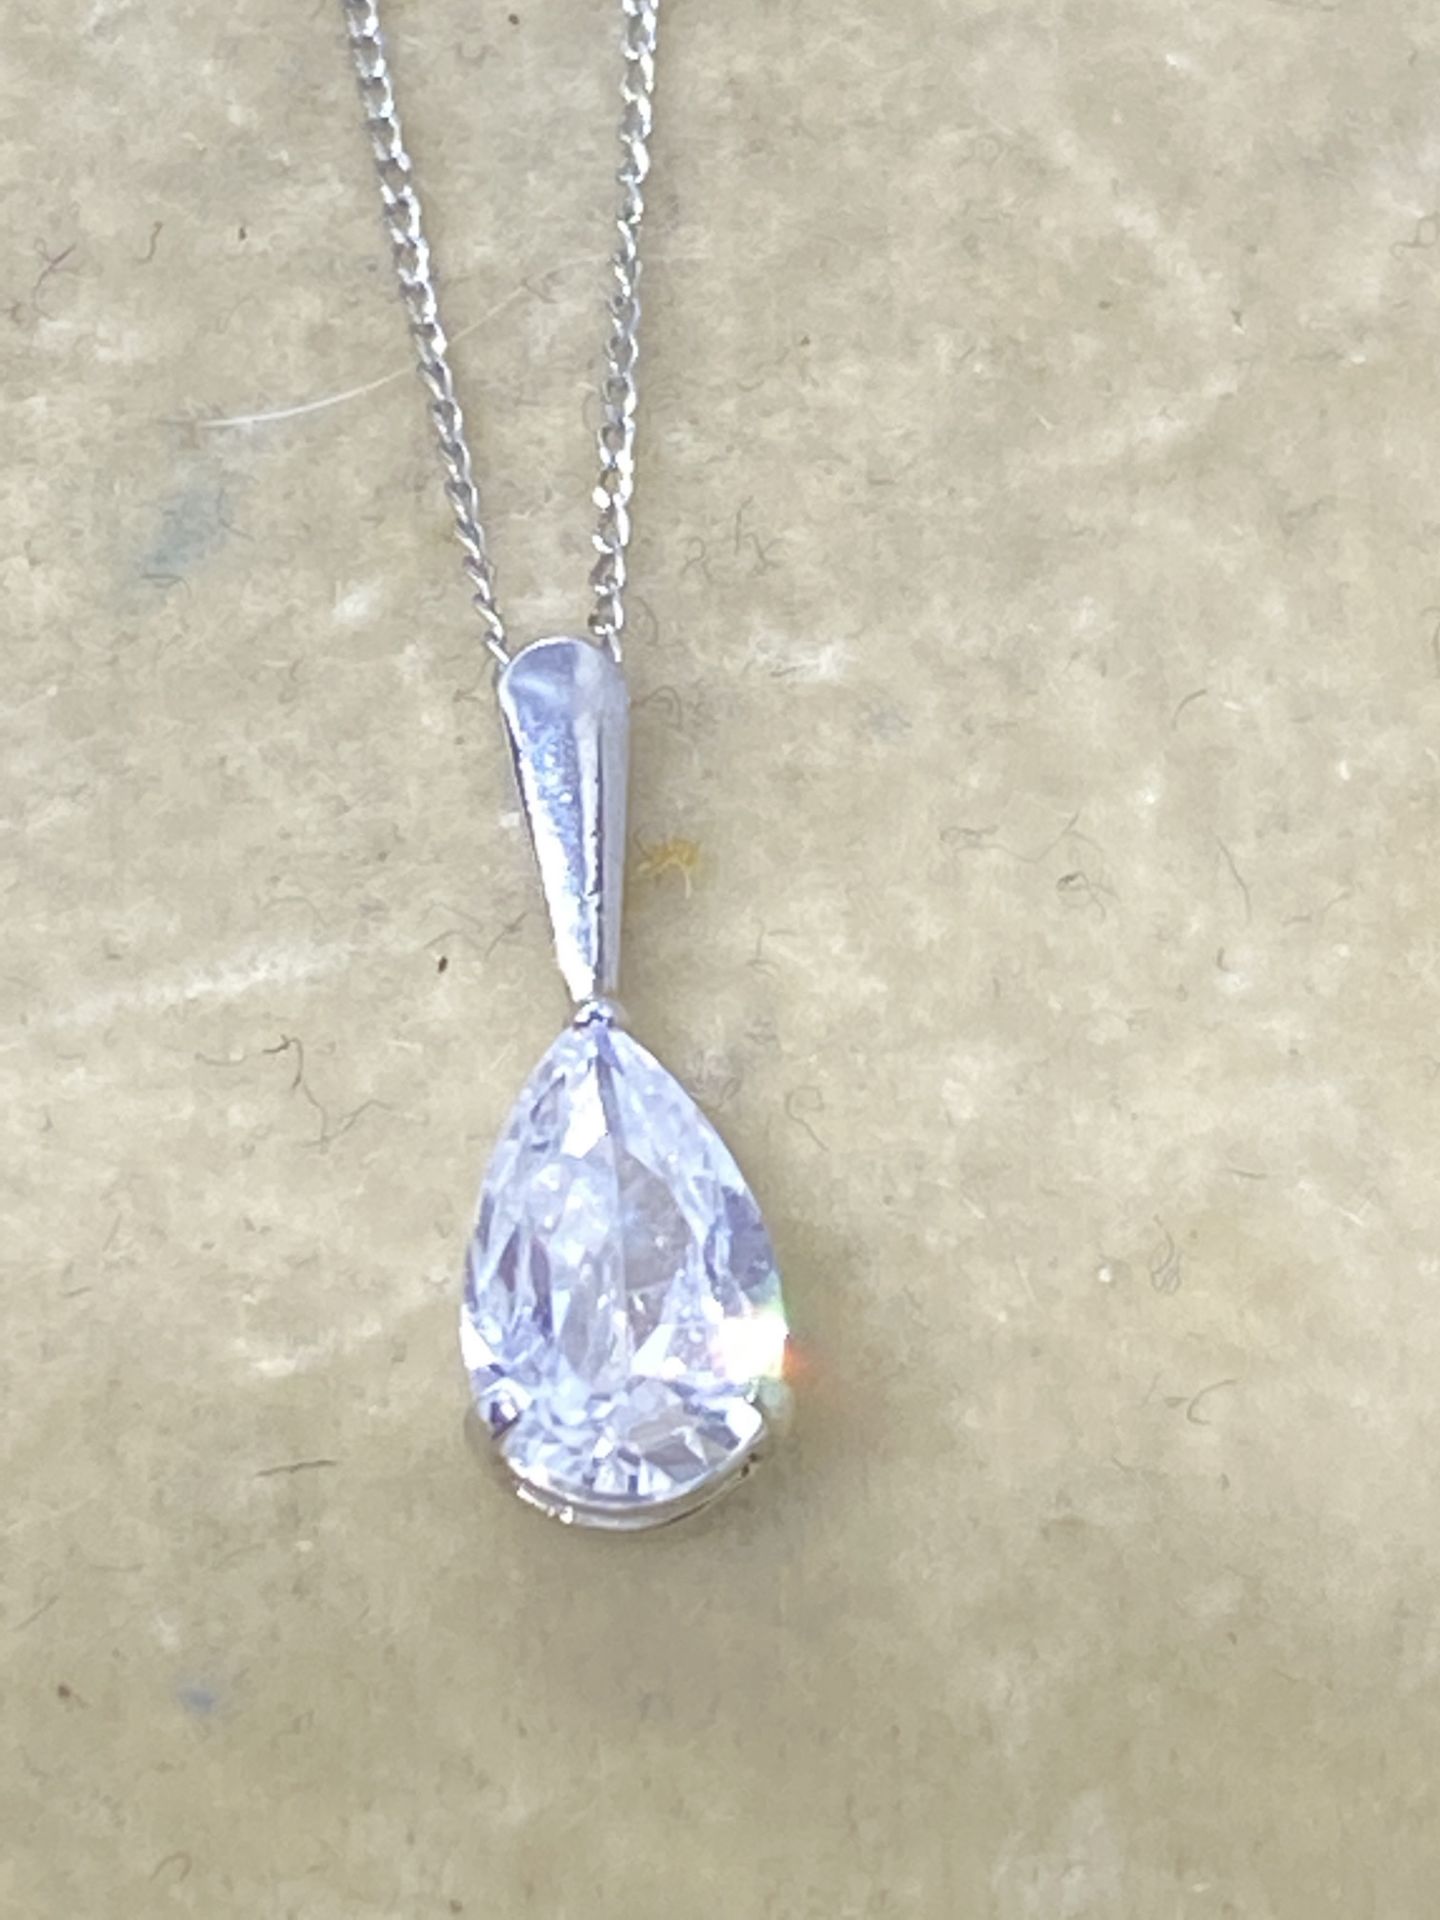 9ct WHITE GOLD PEAR SHAPED PENDANT & EARRING SET - Image 2 of 5